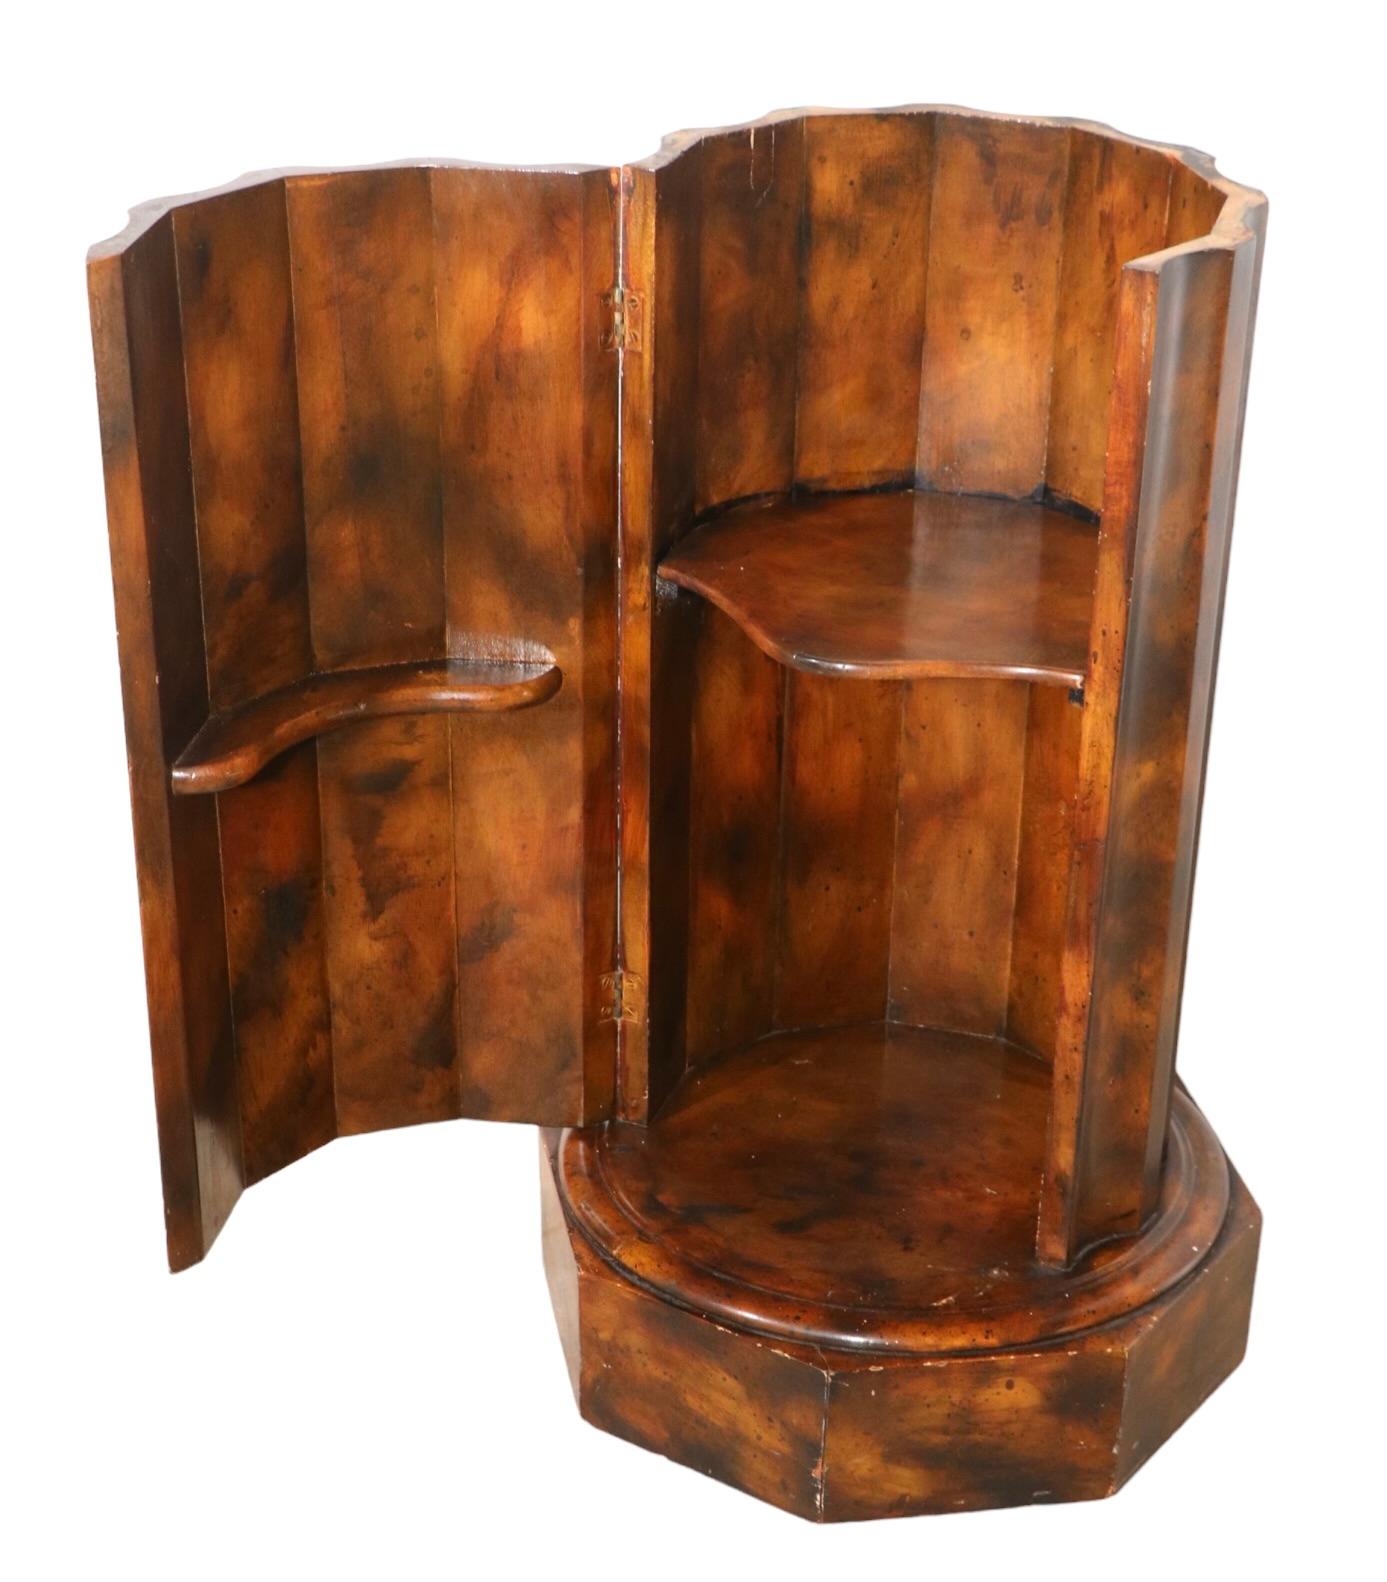 Pr. Decorative Marble Top Half Column Pedestals in Faux Tortoise Shell Finish For Sale 5